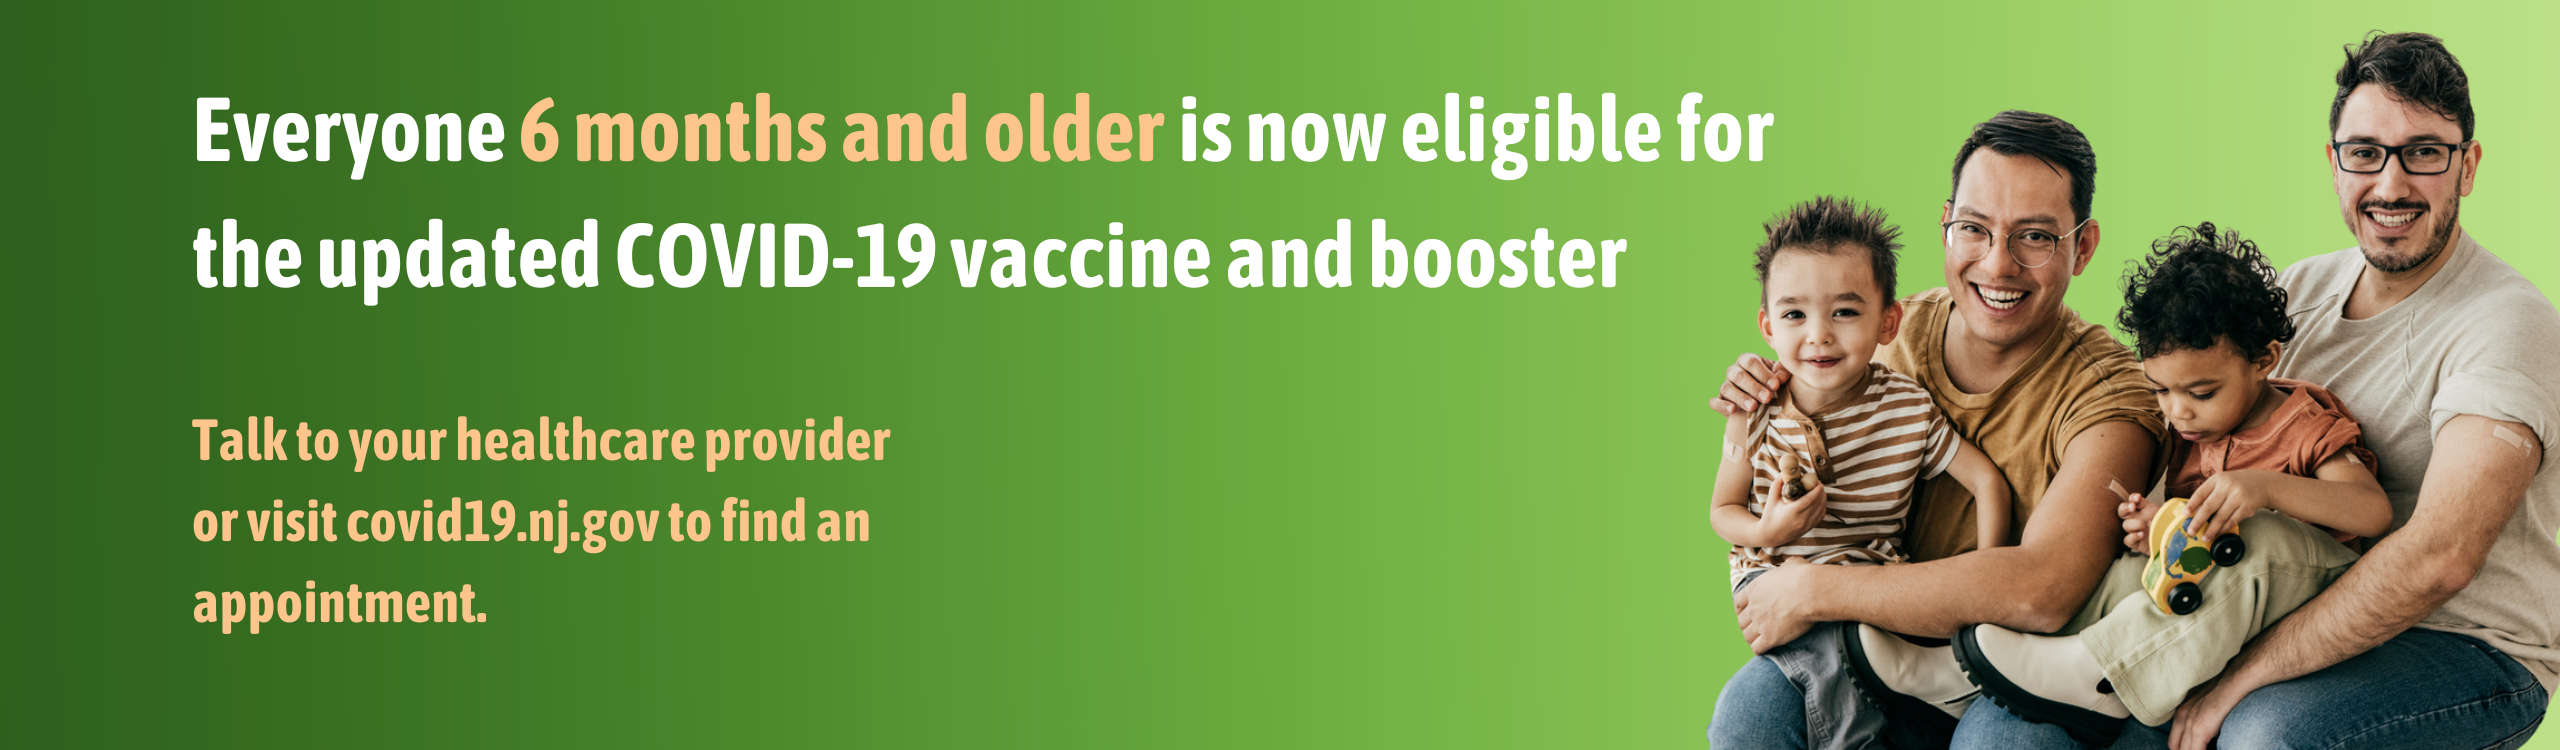 Everyone 6 months and older is now eligible for the updated COVID-19 vaccine and booster